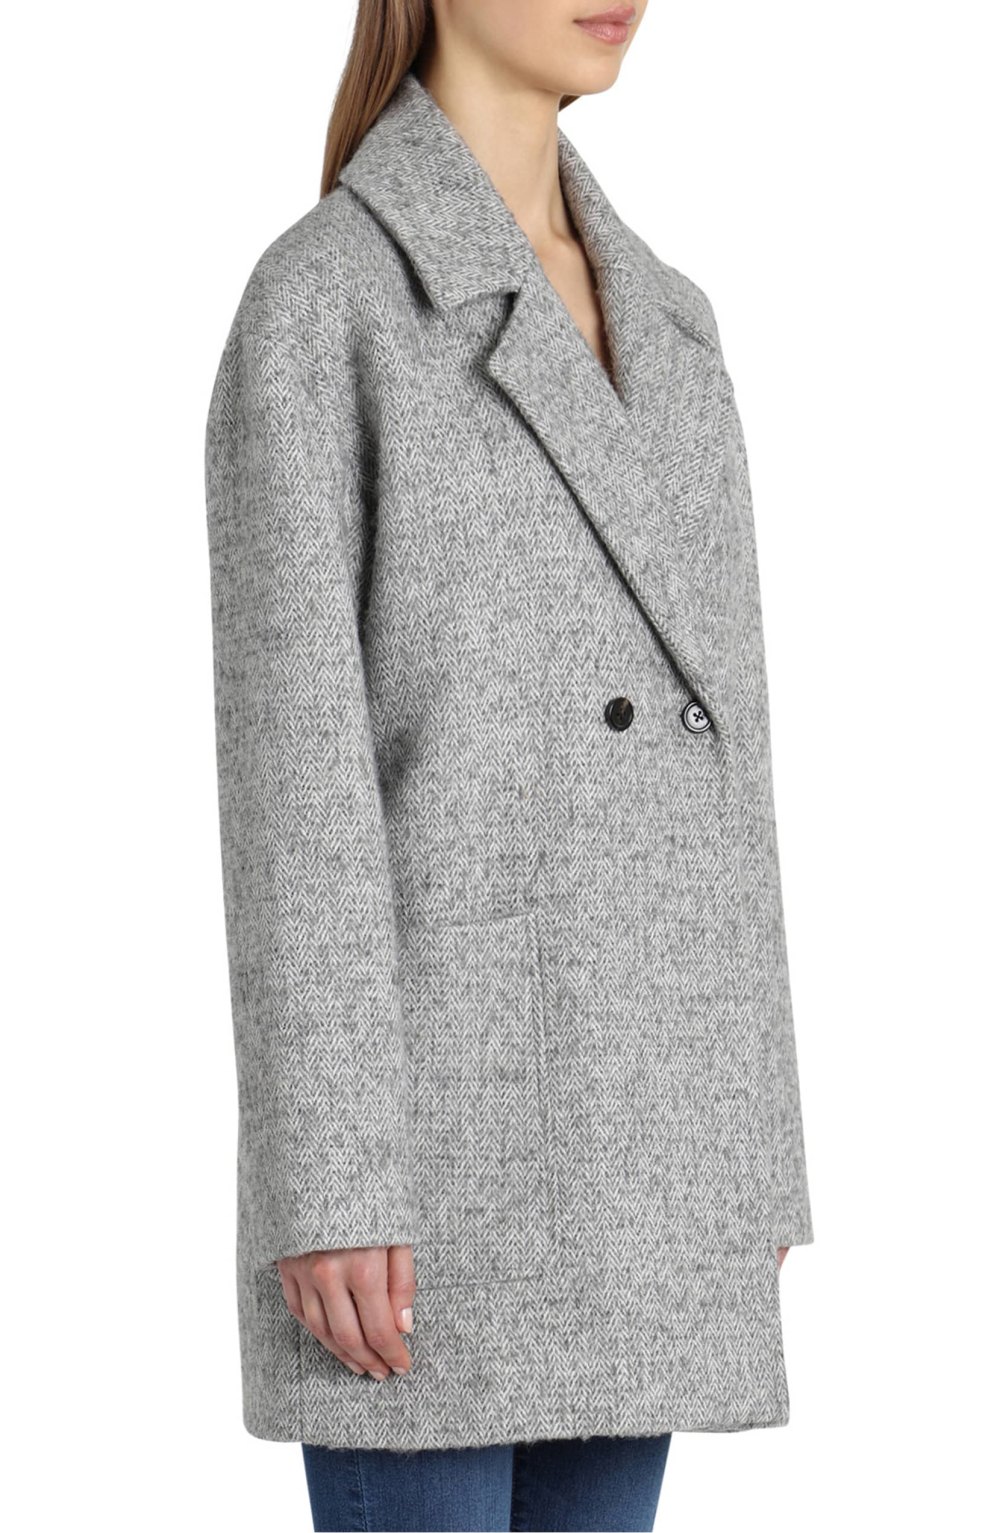 Shop This Menswear-Inspired Wool Coat From Nordstrom | Us Weekly